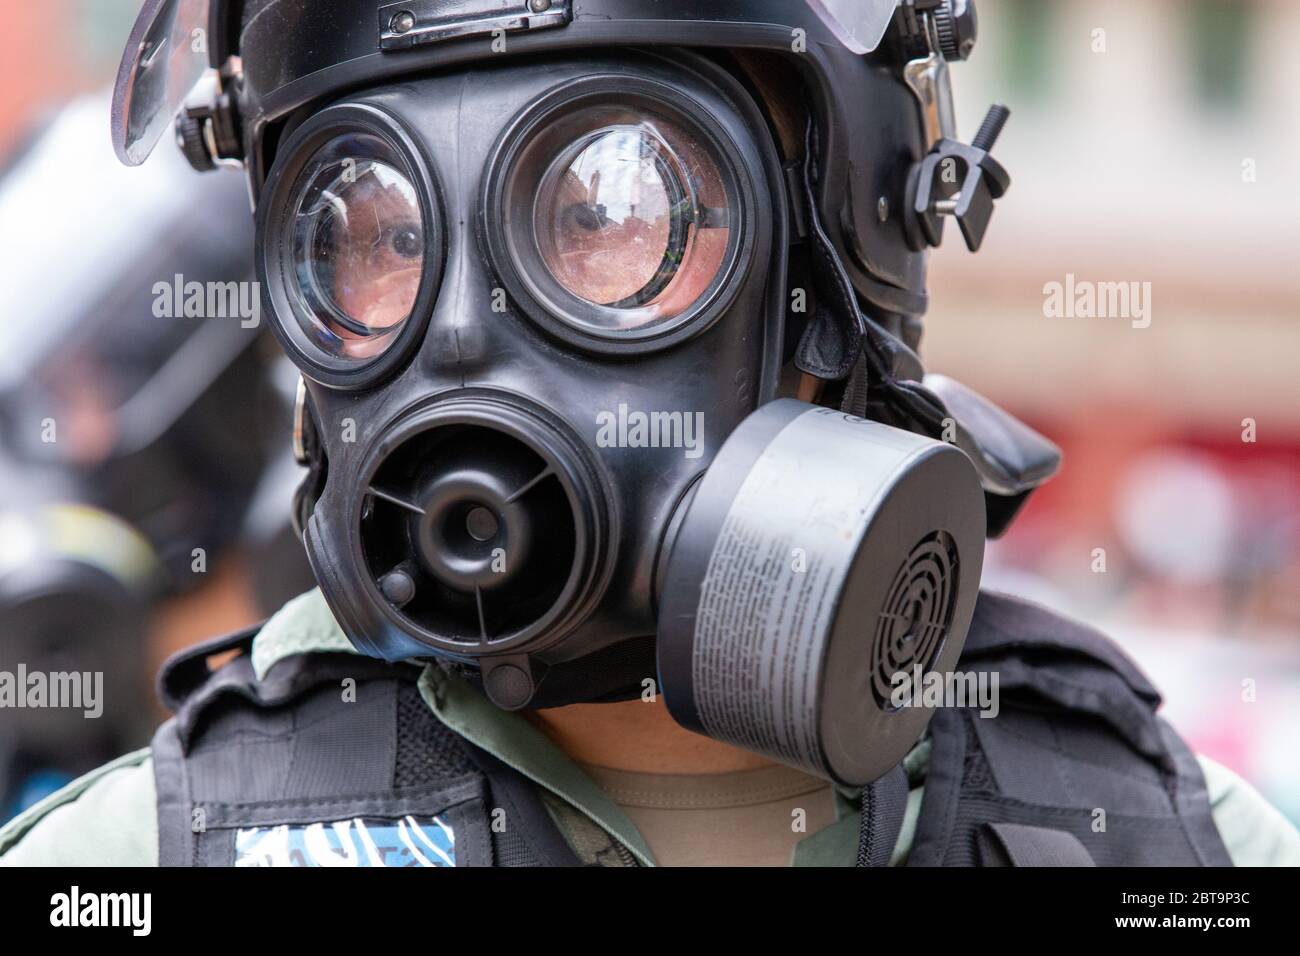 Hong Kong, 24th May 2020. HK Police officer in gas mask.Credit: David Ogg / Alamy Live News Stock Photo